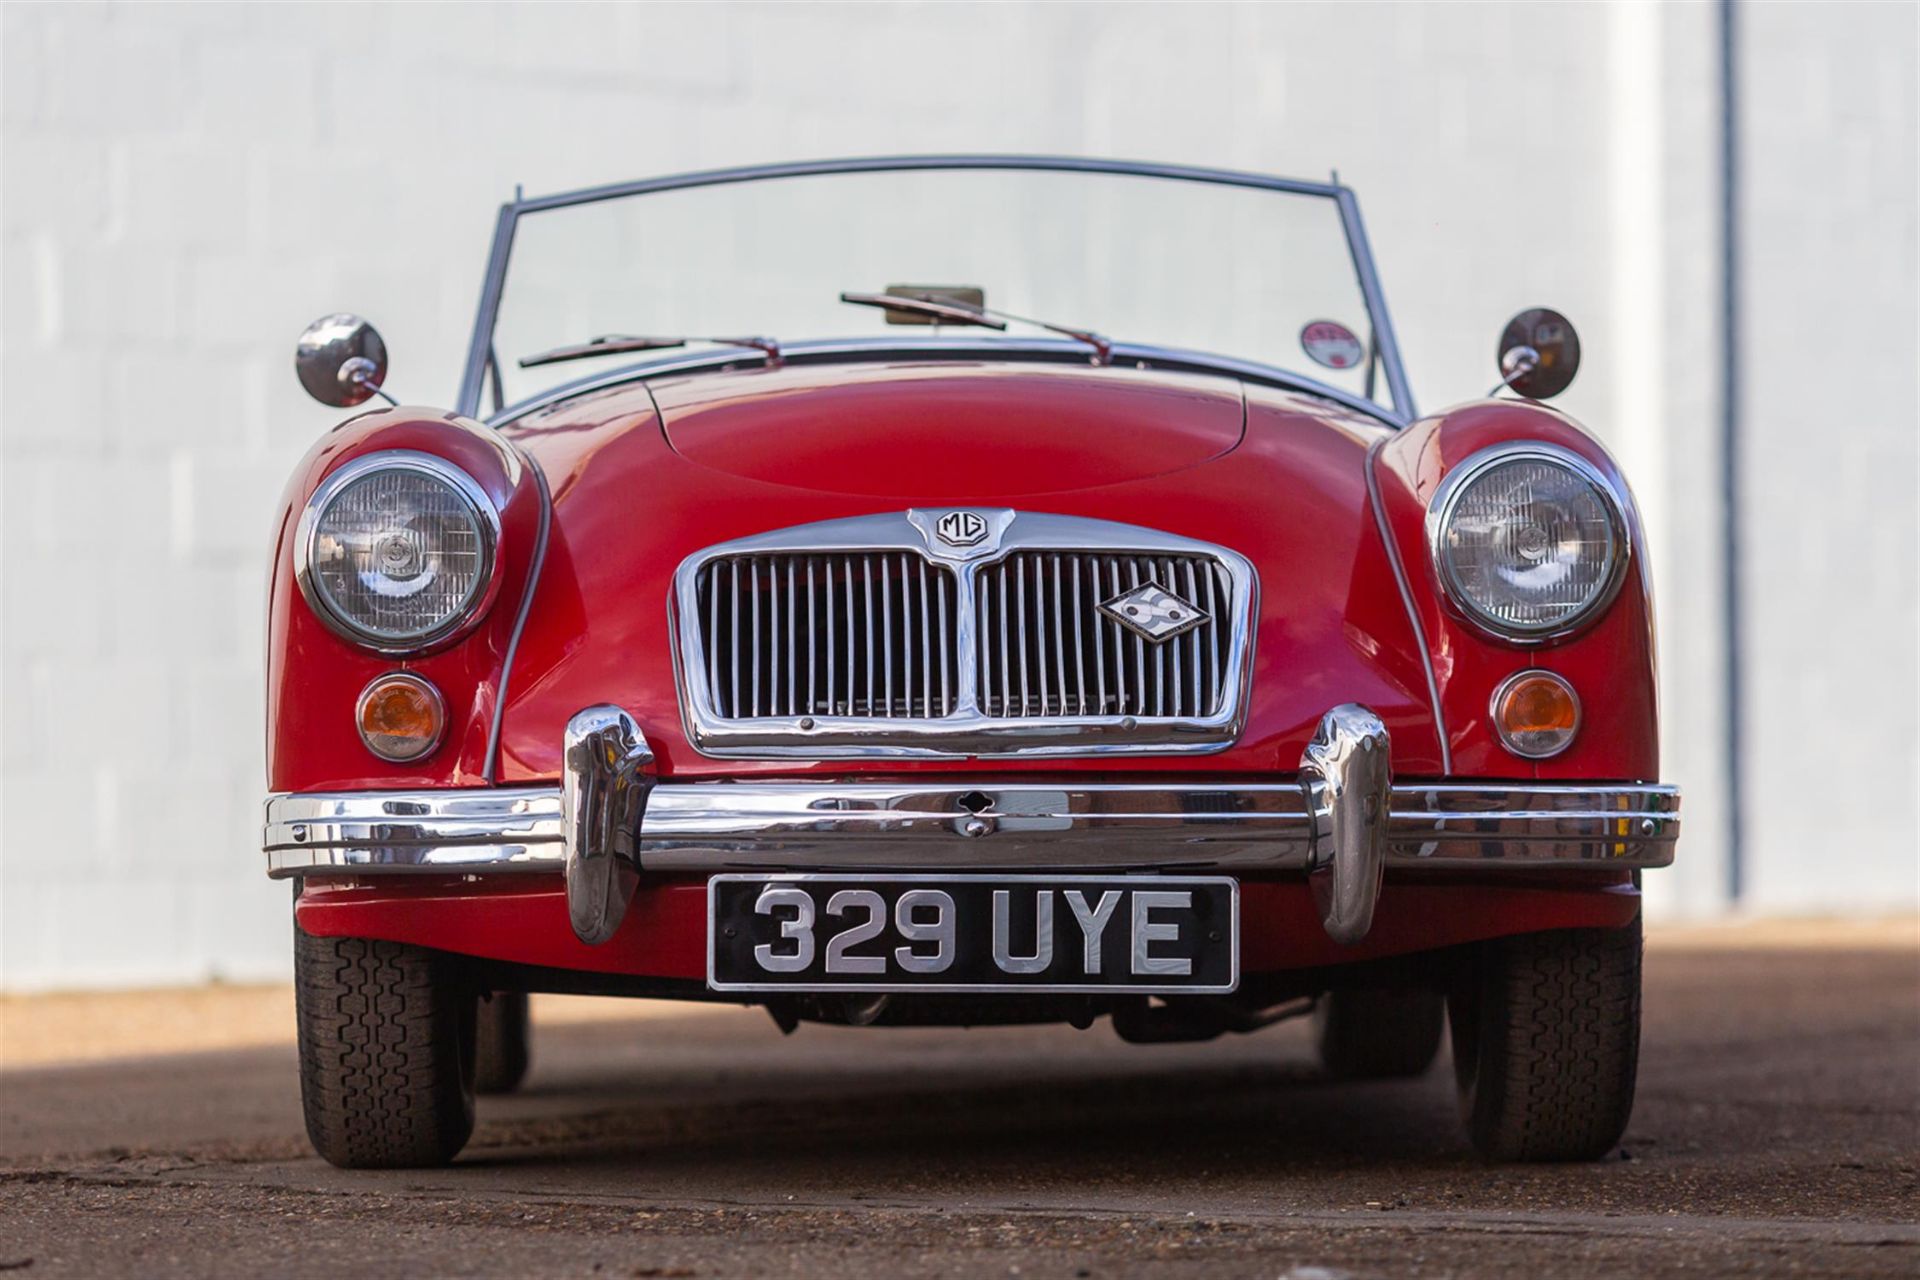 1960 MG A Twin Cam Roadster - Image 6 of 10